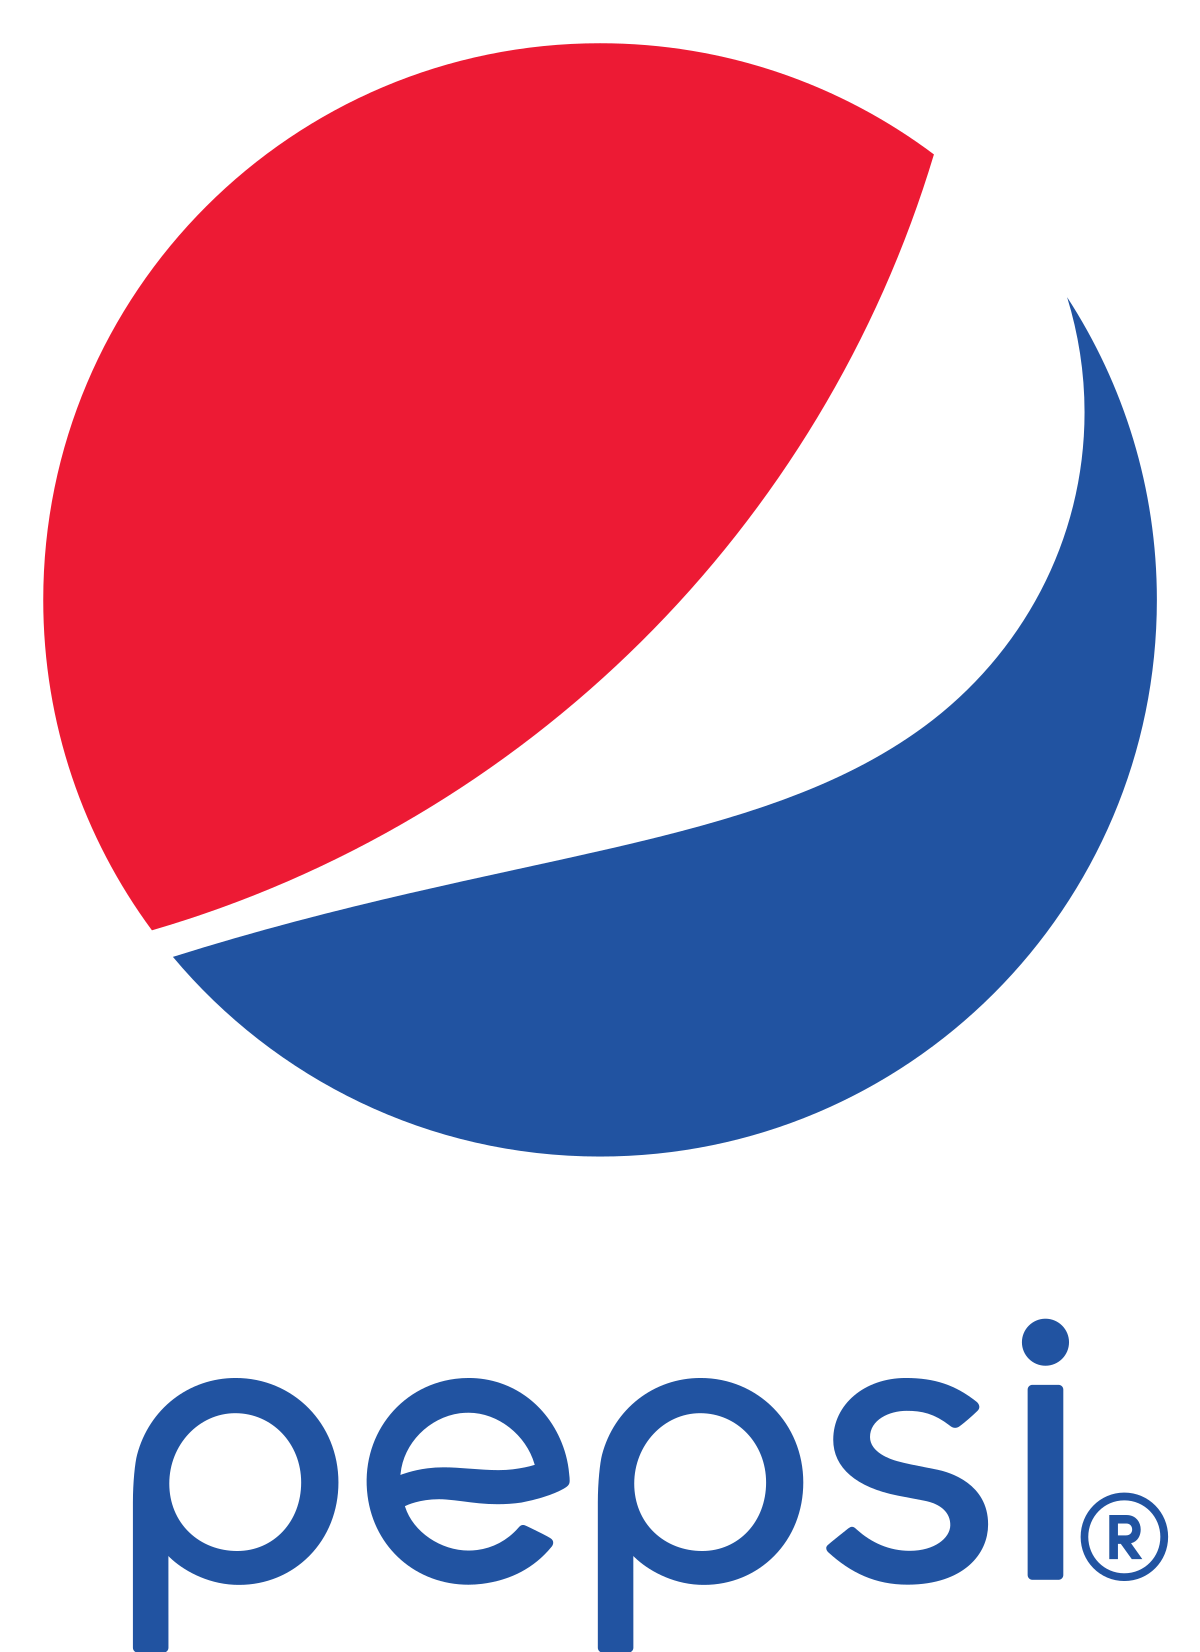 Find out more about pepsi